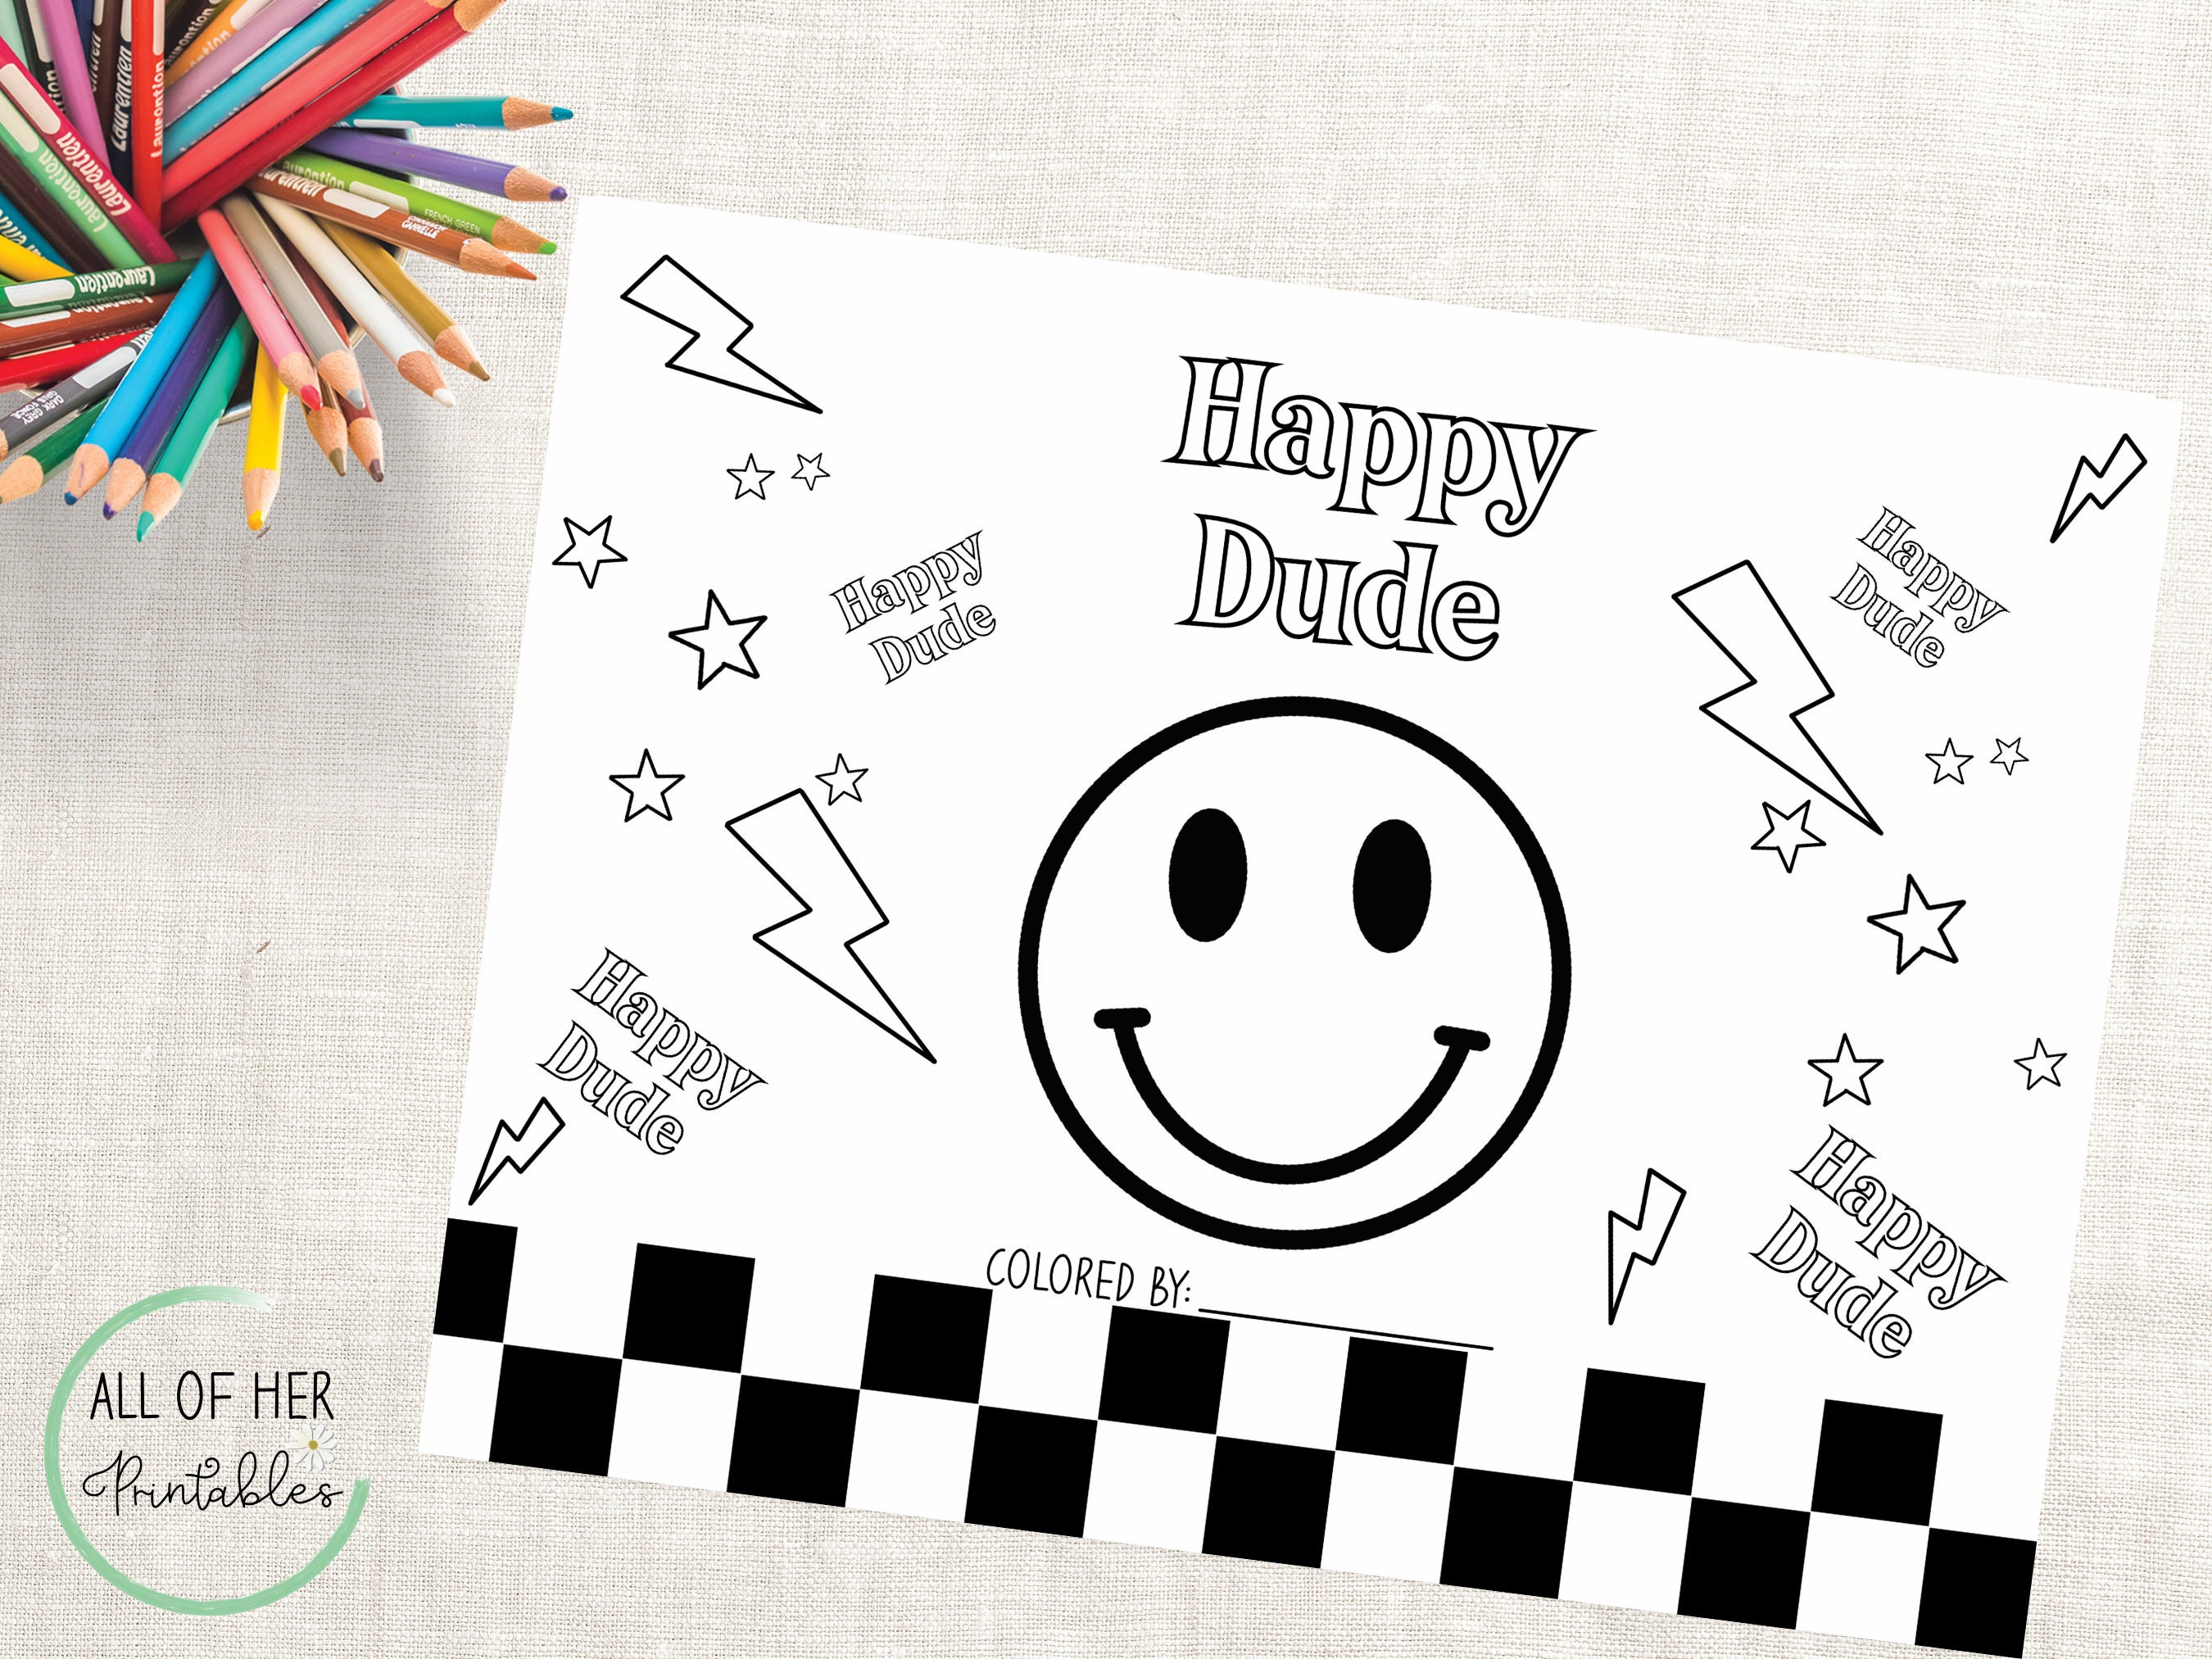 One happy dude coloring sheet digital smiley face x coloring page kids entertainment birthday game party favor